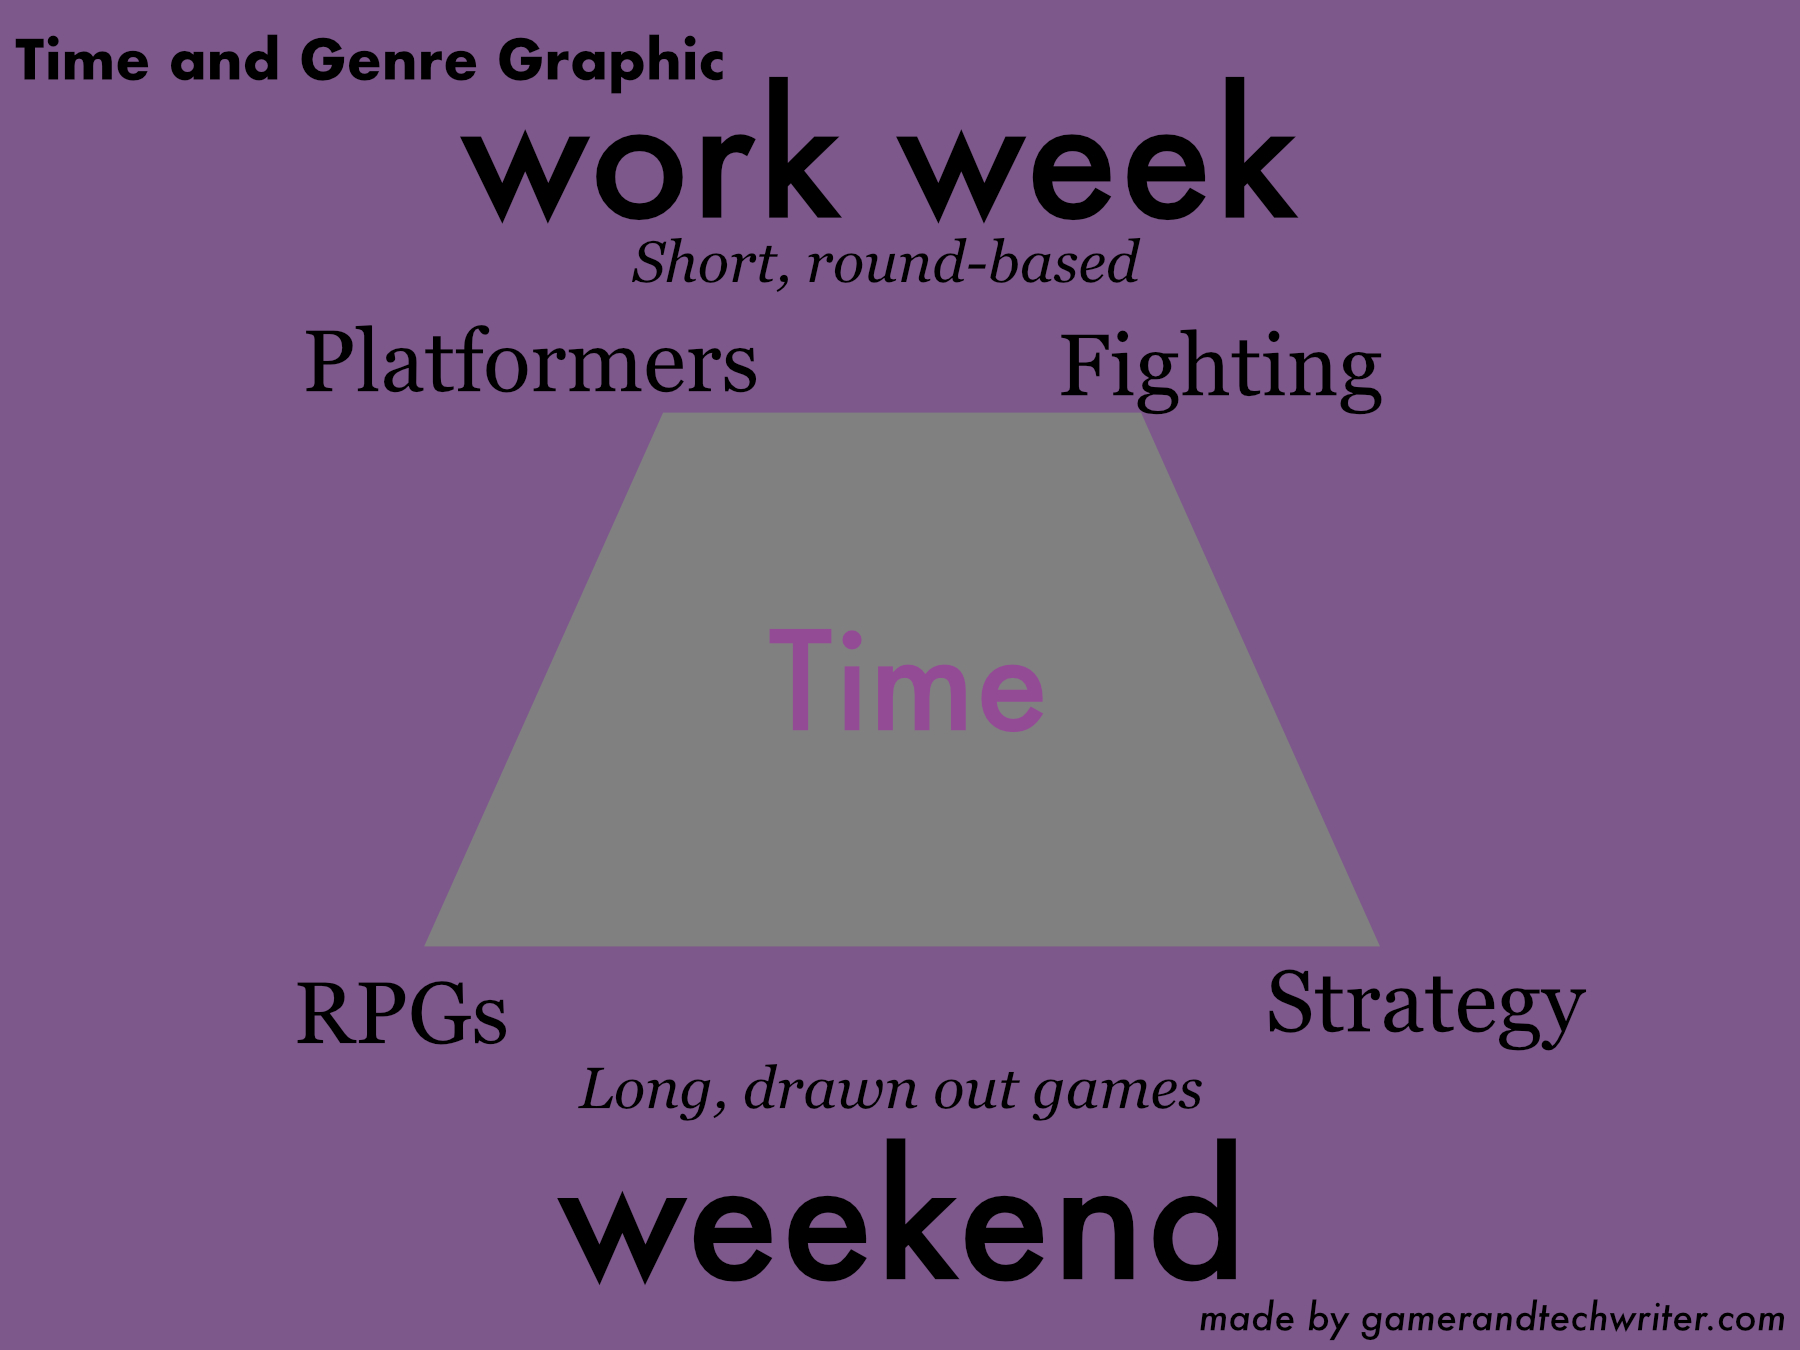 Time and Genre Graphic.jpg